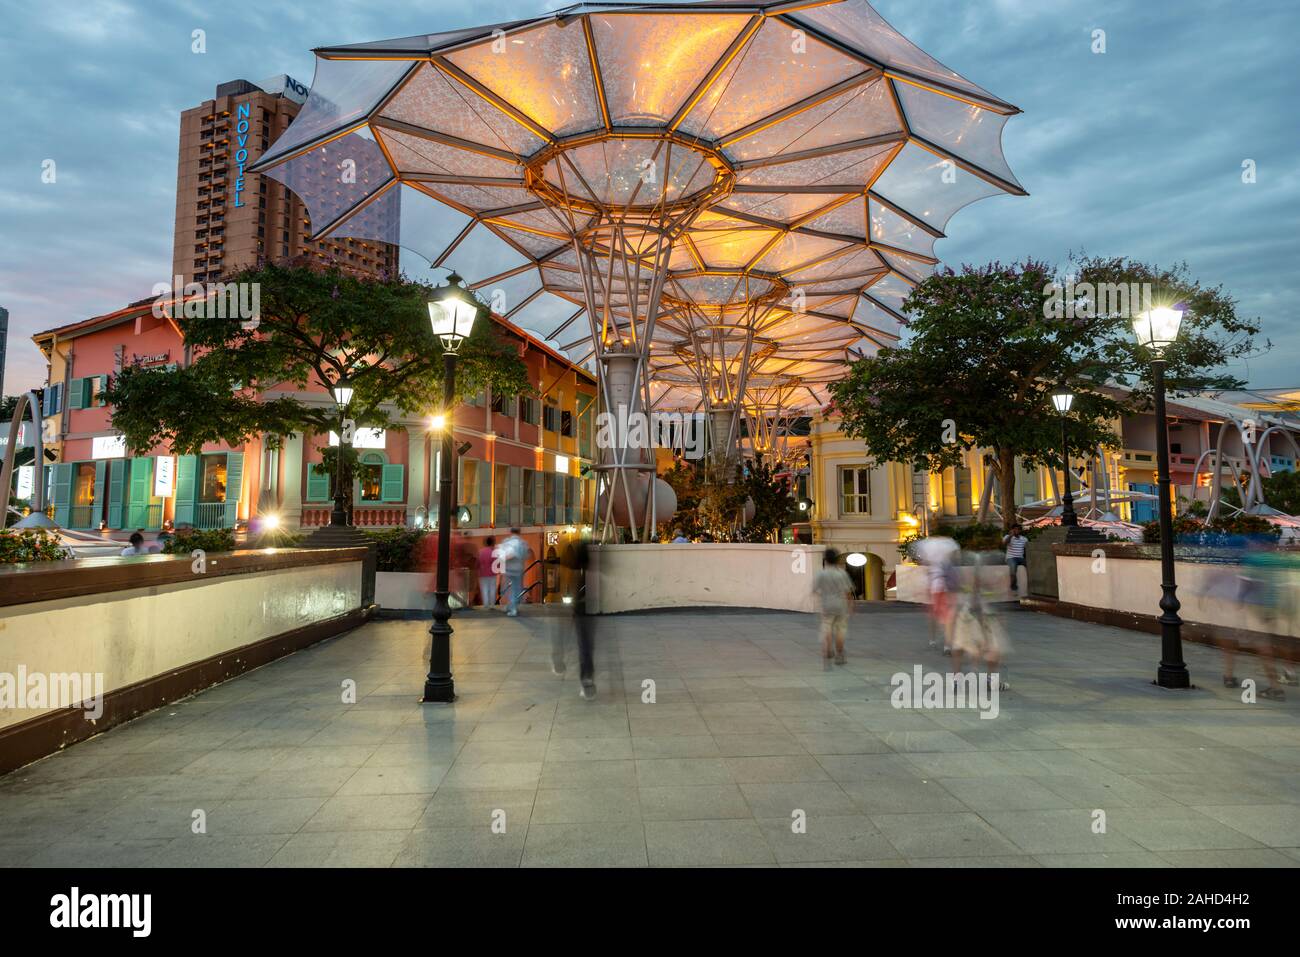 Bridge over the Singapore River, Read Street, passage to the hip party quarter at Clarke Quay, oversized umbrellas covering the passage, at night, dus Stock Photo